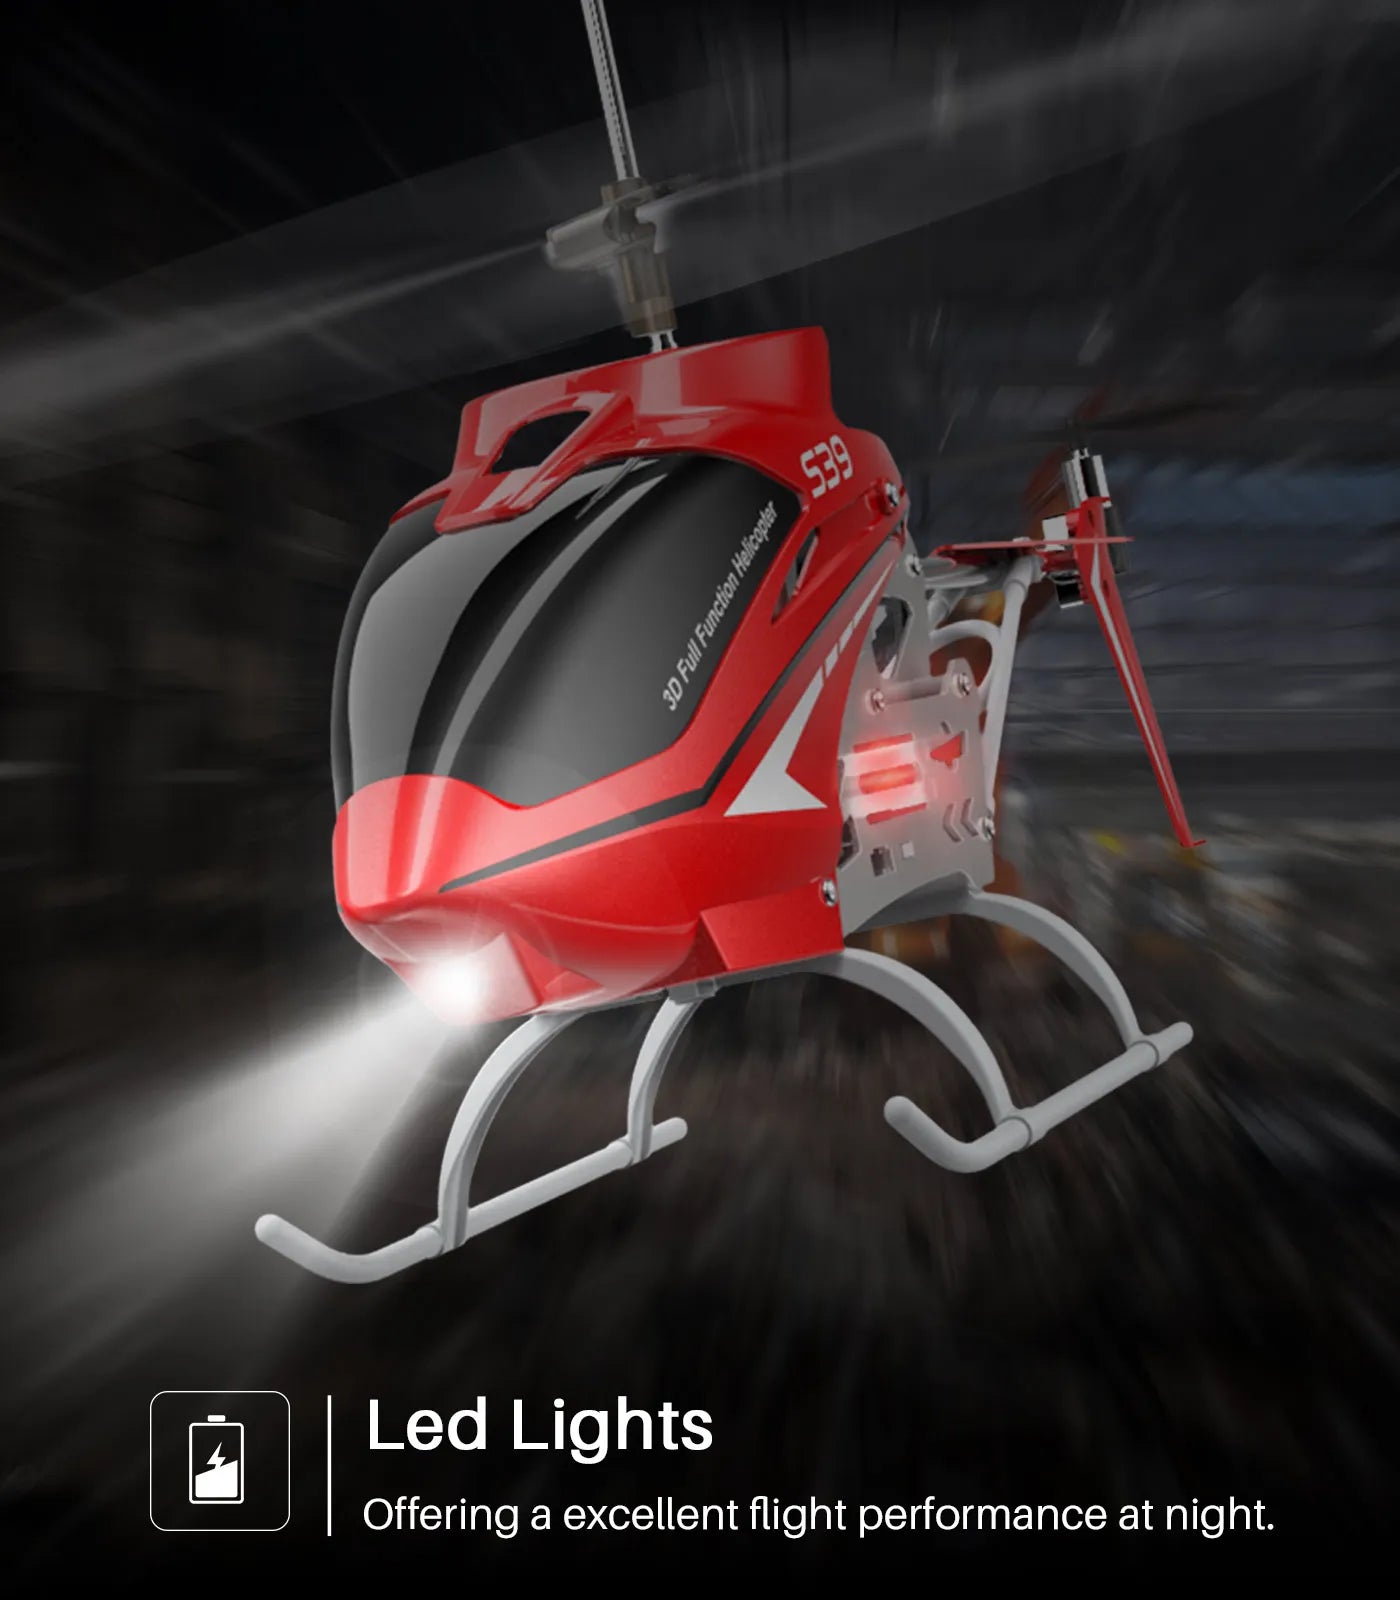 SYMA S39 RC Helicopter, Led Lights Offering a excellent flight performance at night: 539 1